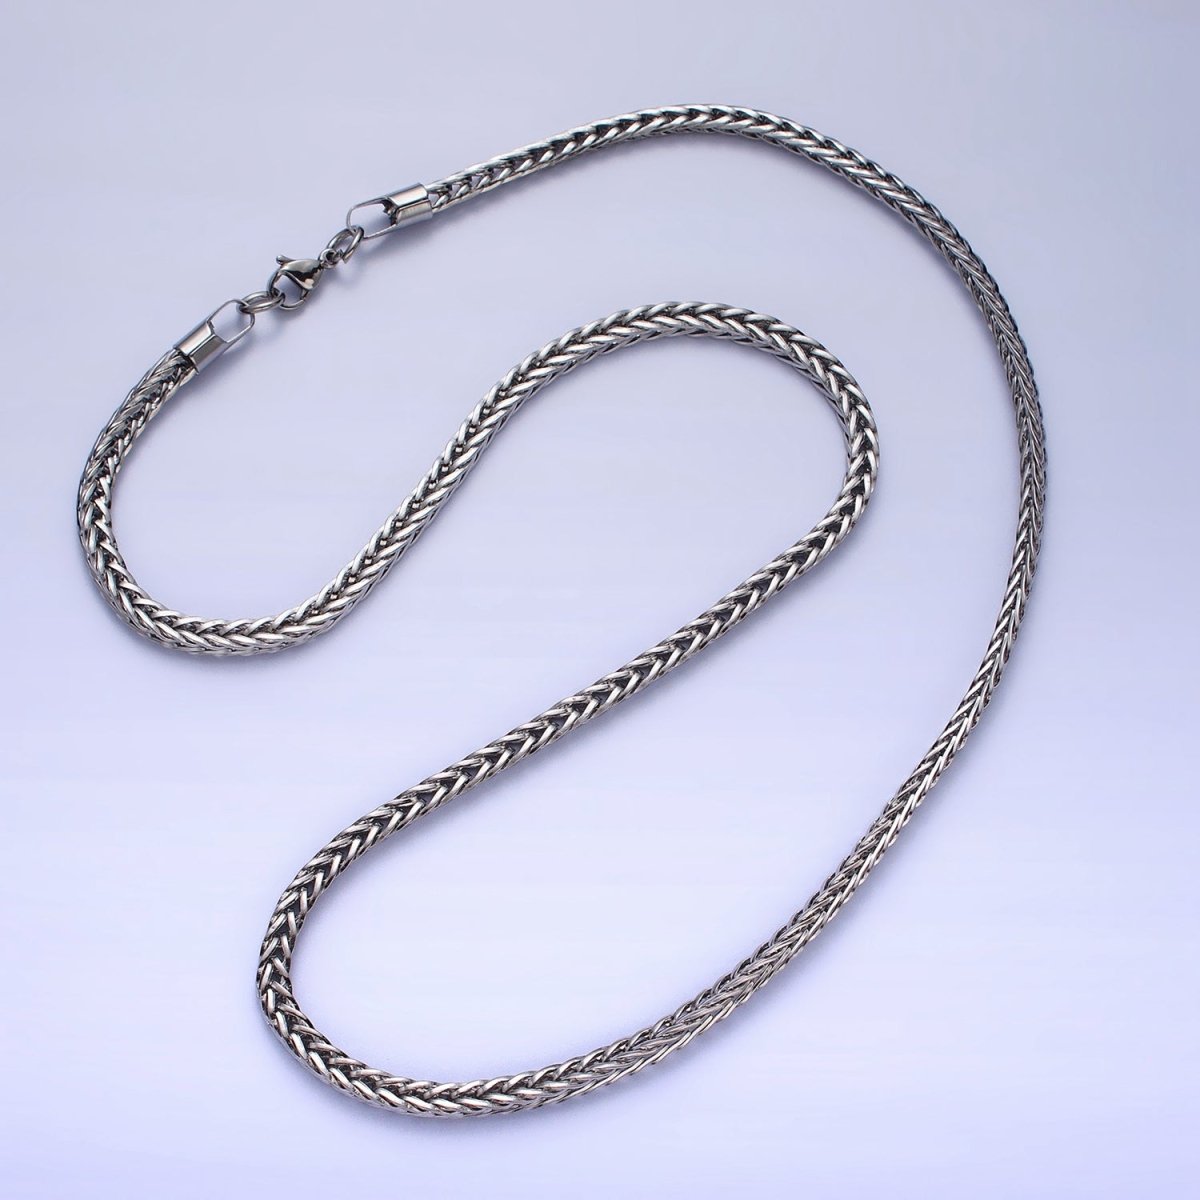 Long Gold Foxtail Wheat Chain Necklace Stainless Steel 4.2mm Thick Men's Chain 23.5 inch Necklace | WA-1625 WA-1626 Clearance Pricing - DLUXCA